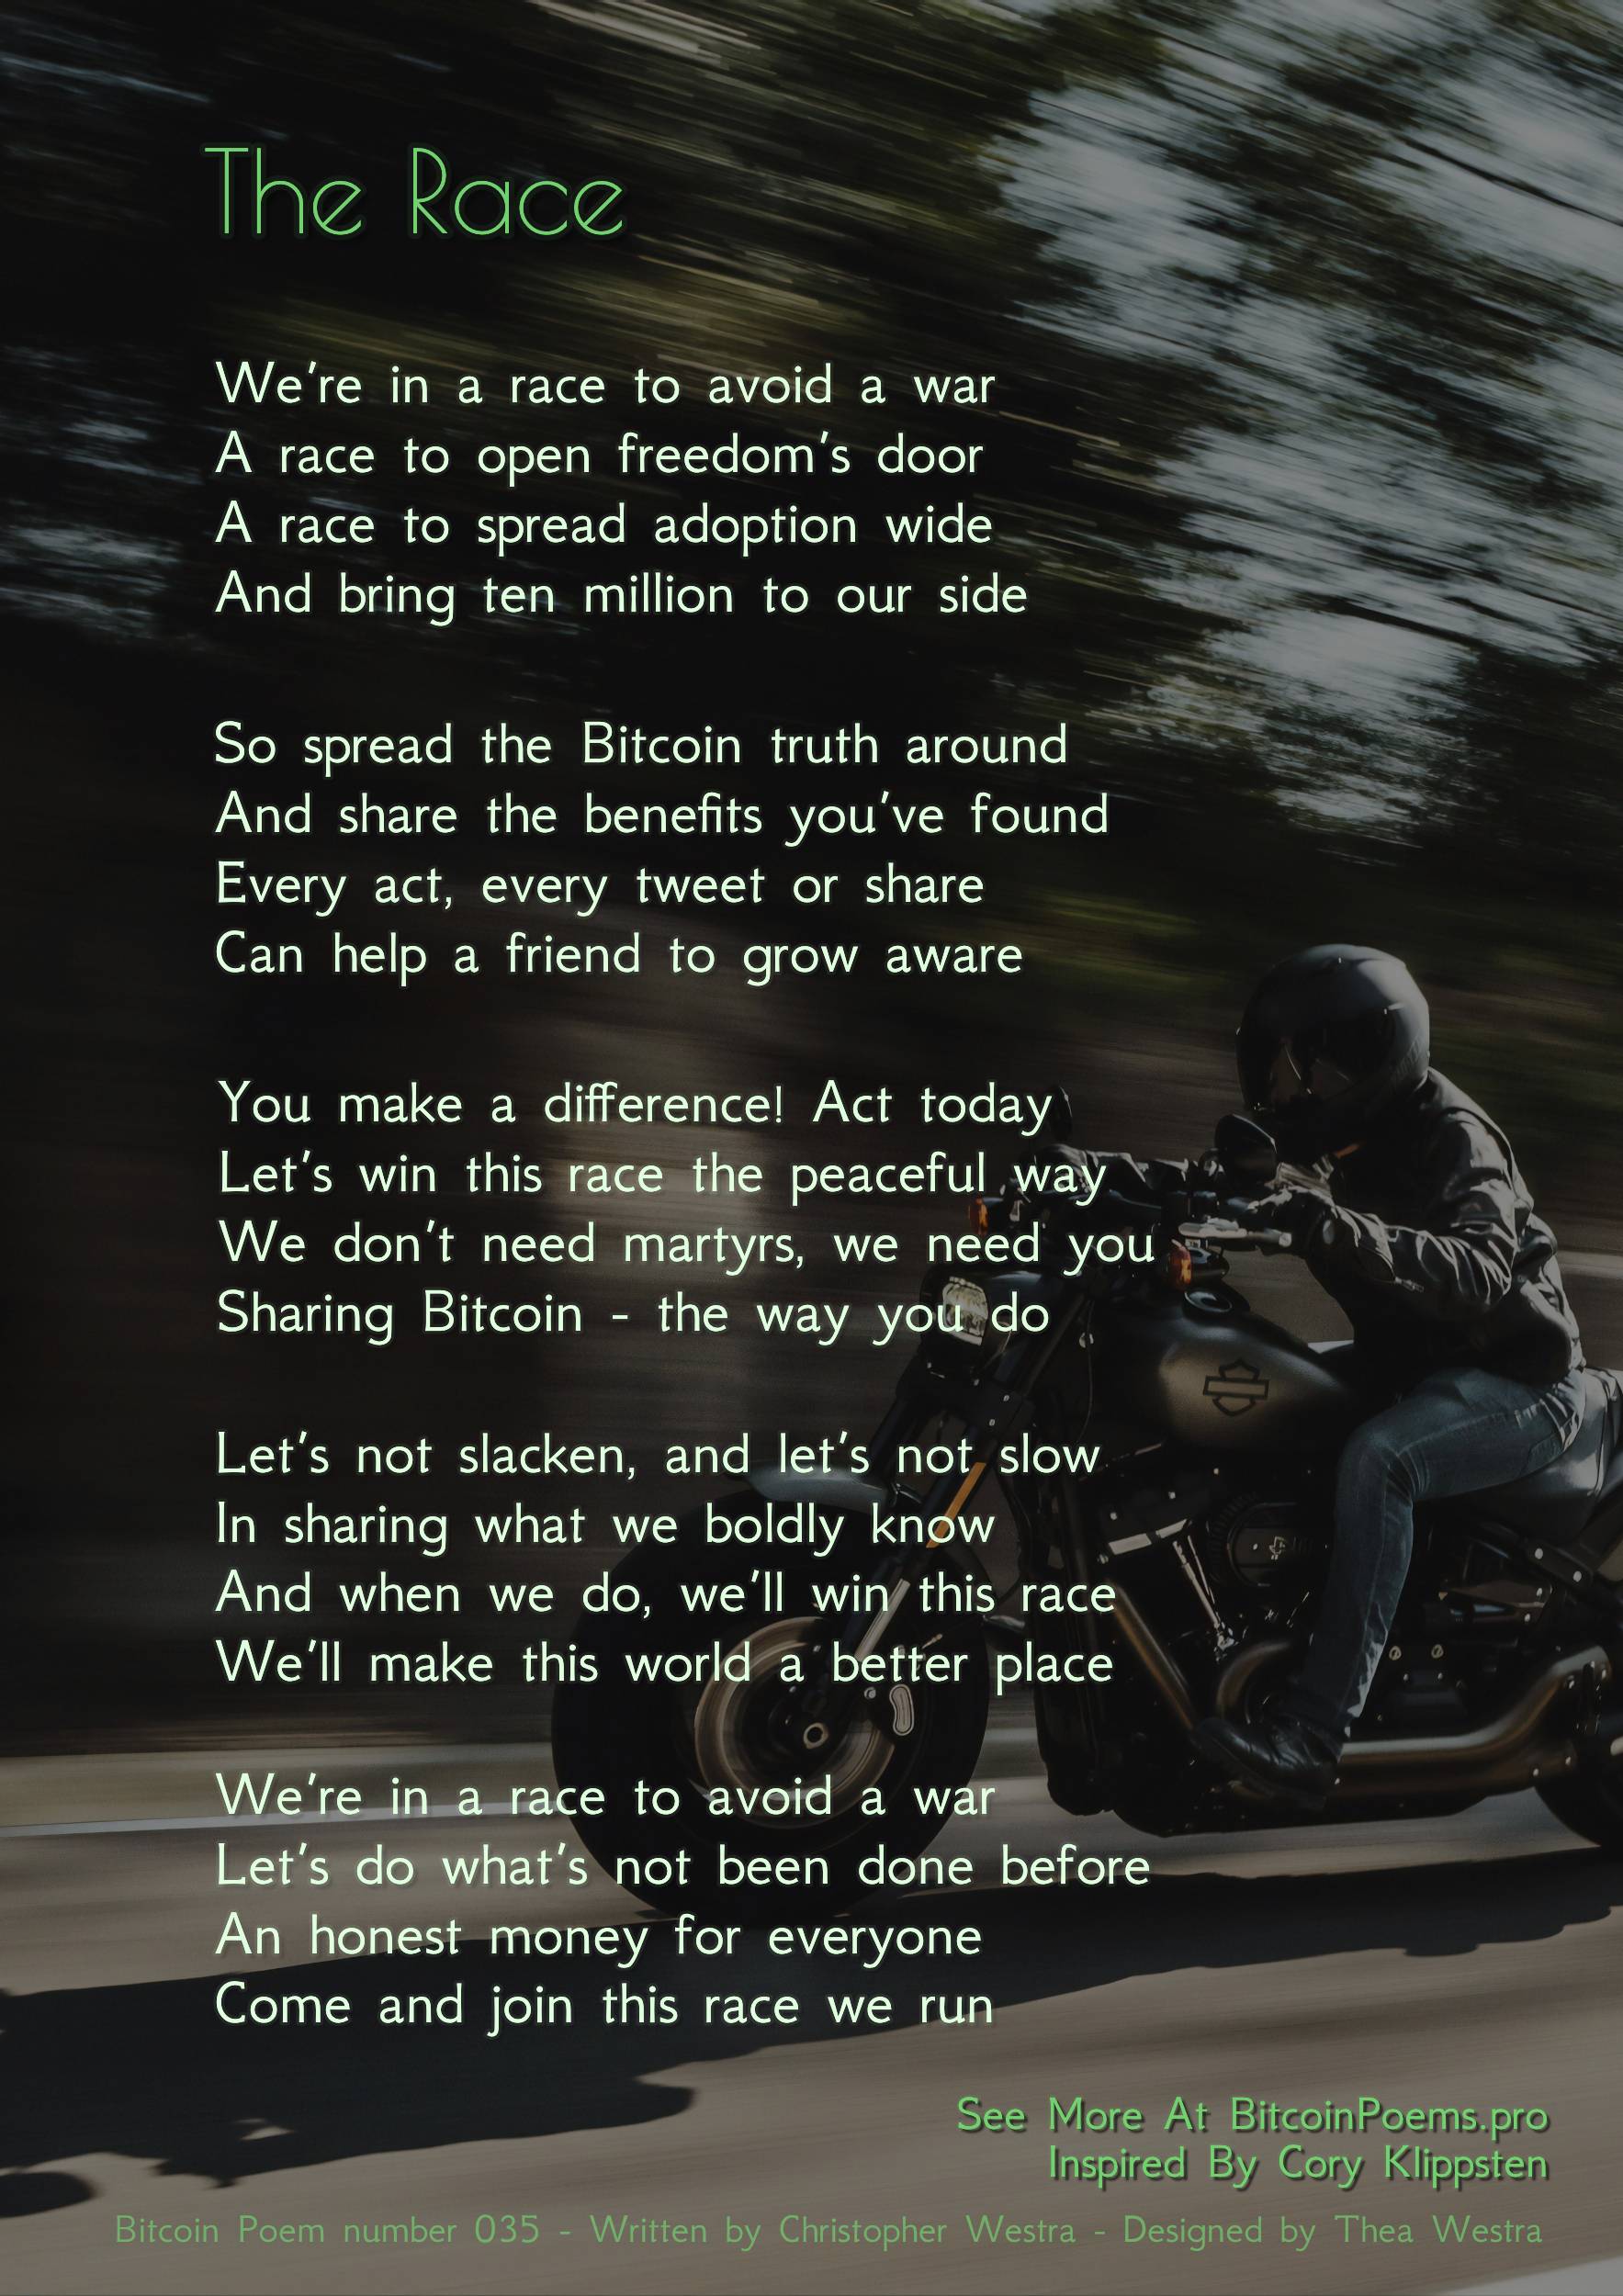 The Race - Bitcoin Poem 035 by Christopher Westra